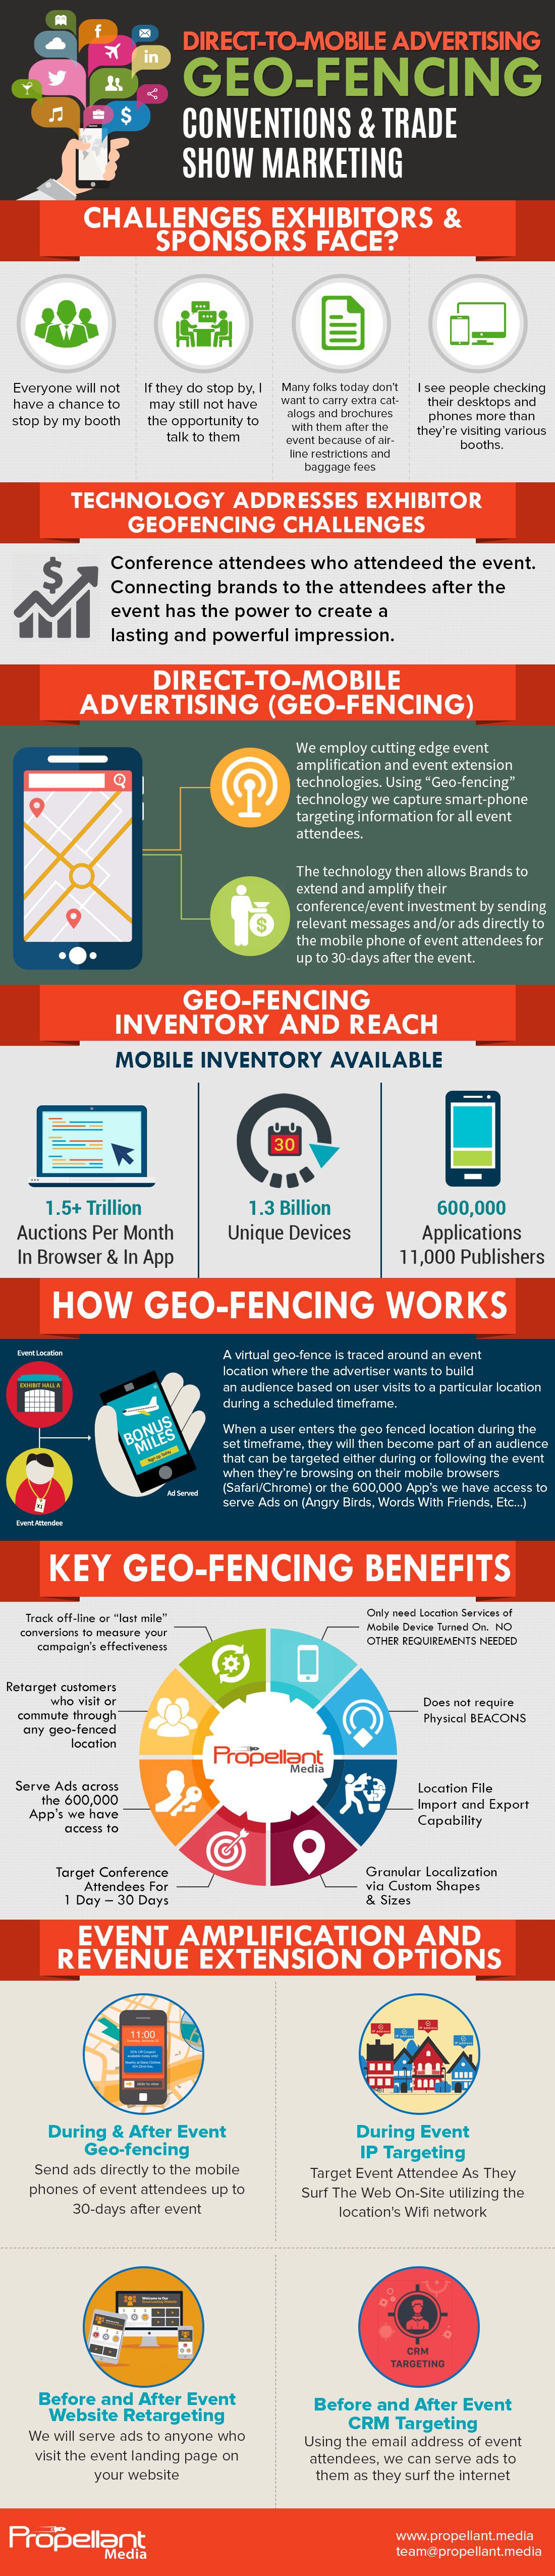 Trade Show Convention Marketing Infographic